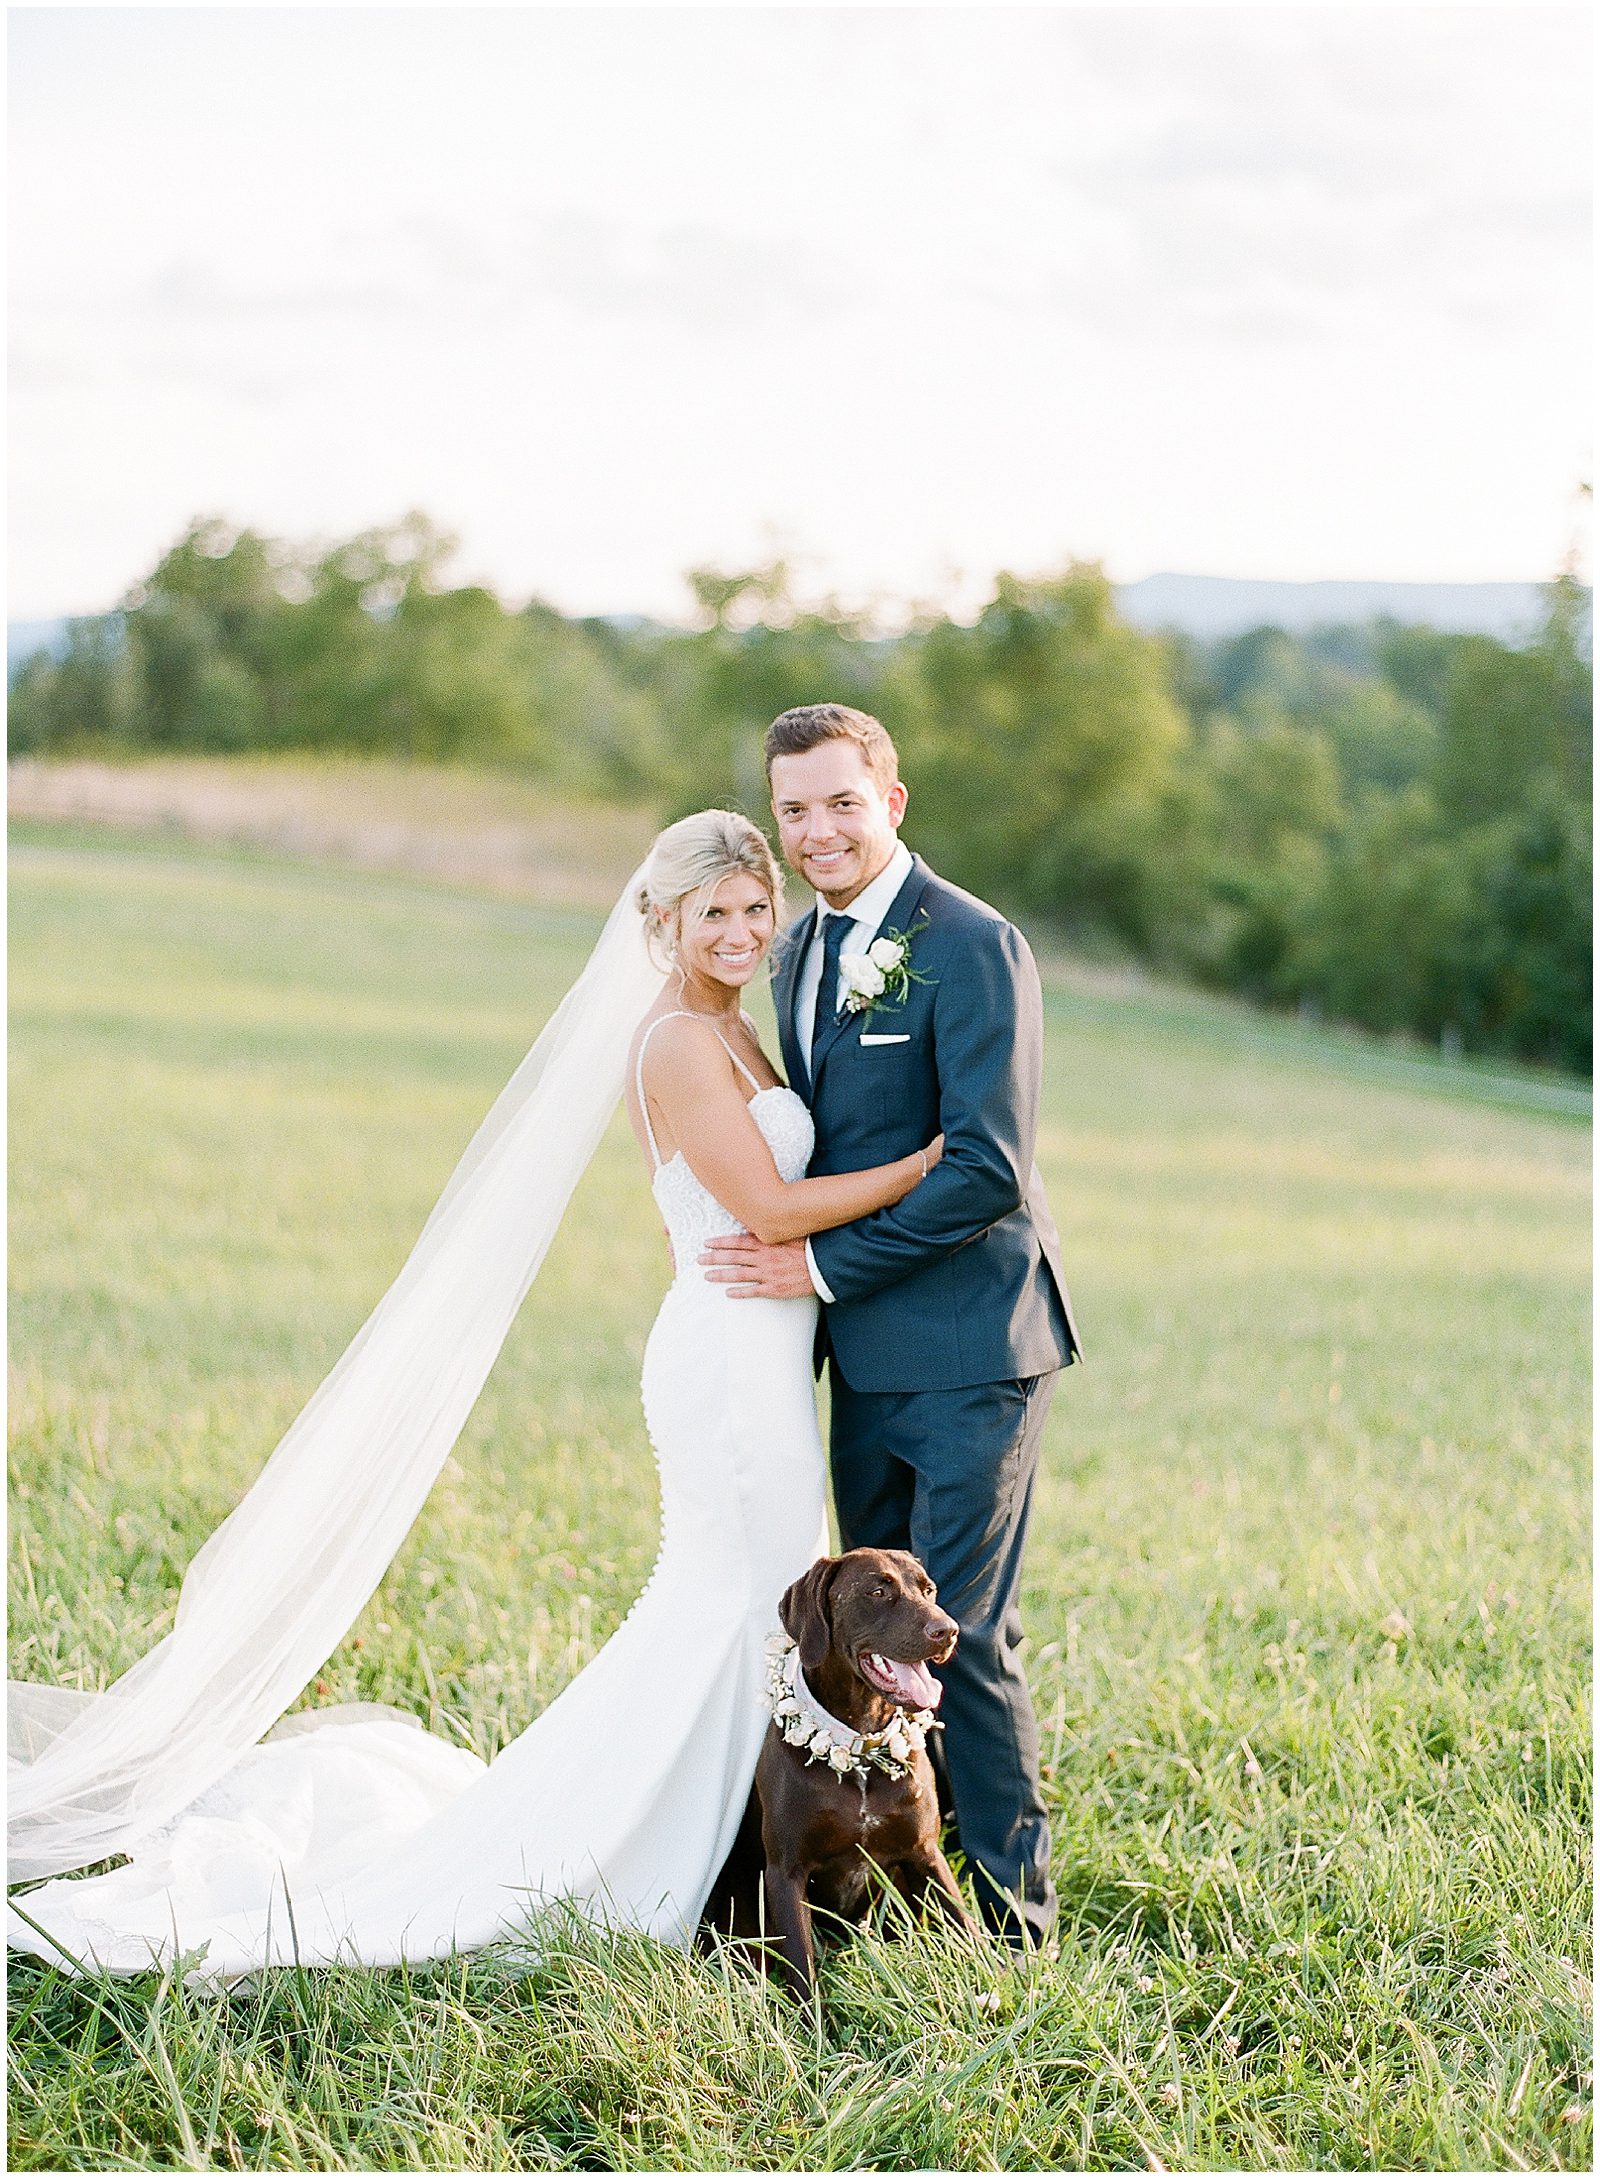 Bride and Groom Smiling at Camera in Field with Their Dog Photo